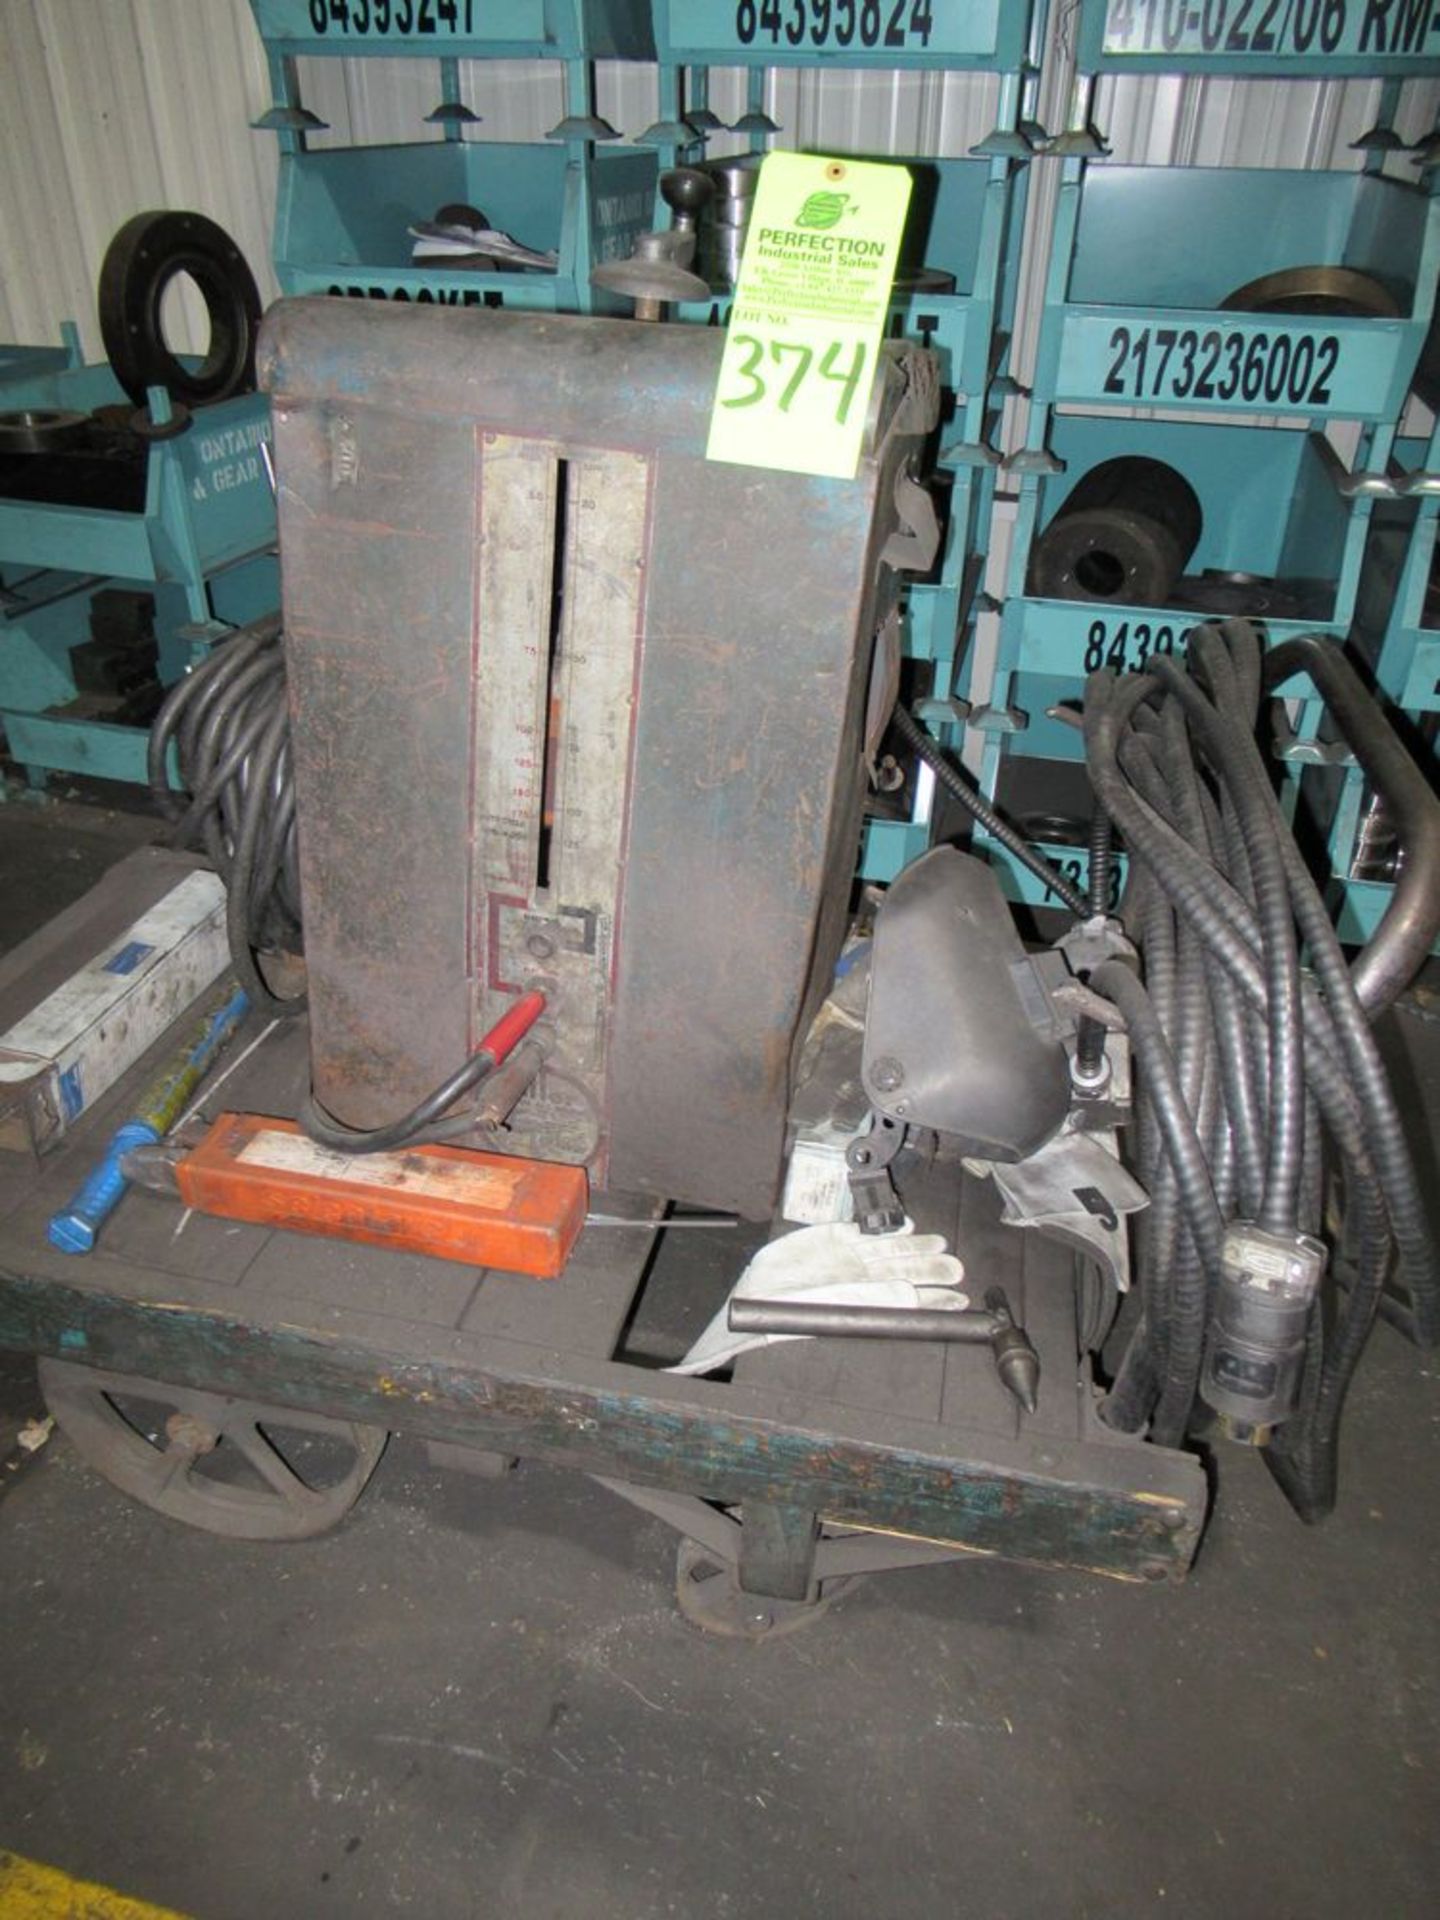 ARC Welder 3 ph. w/ Cart ( Located In Back Bldg. ) ($50 Rigging Cost) - Image 2 of 3